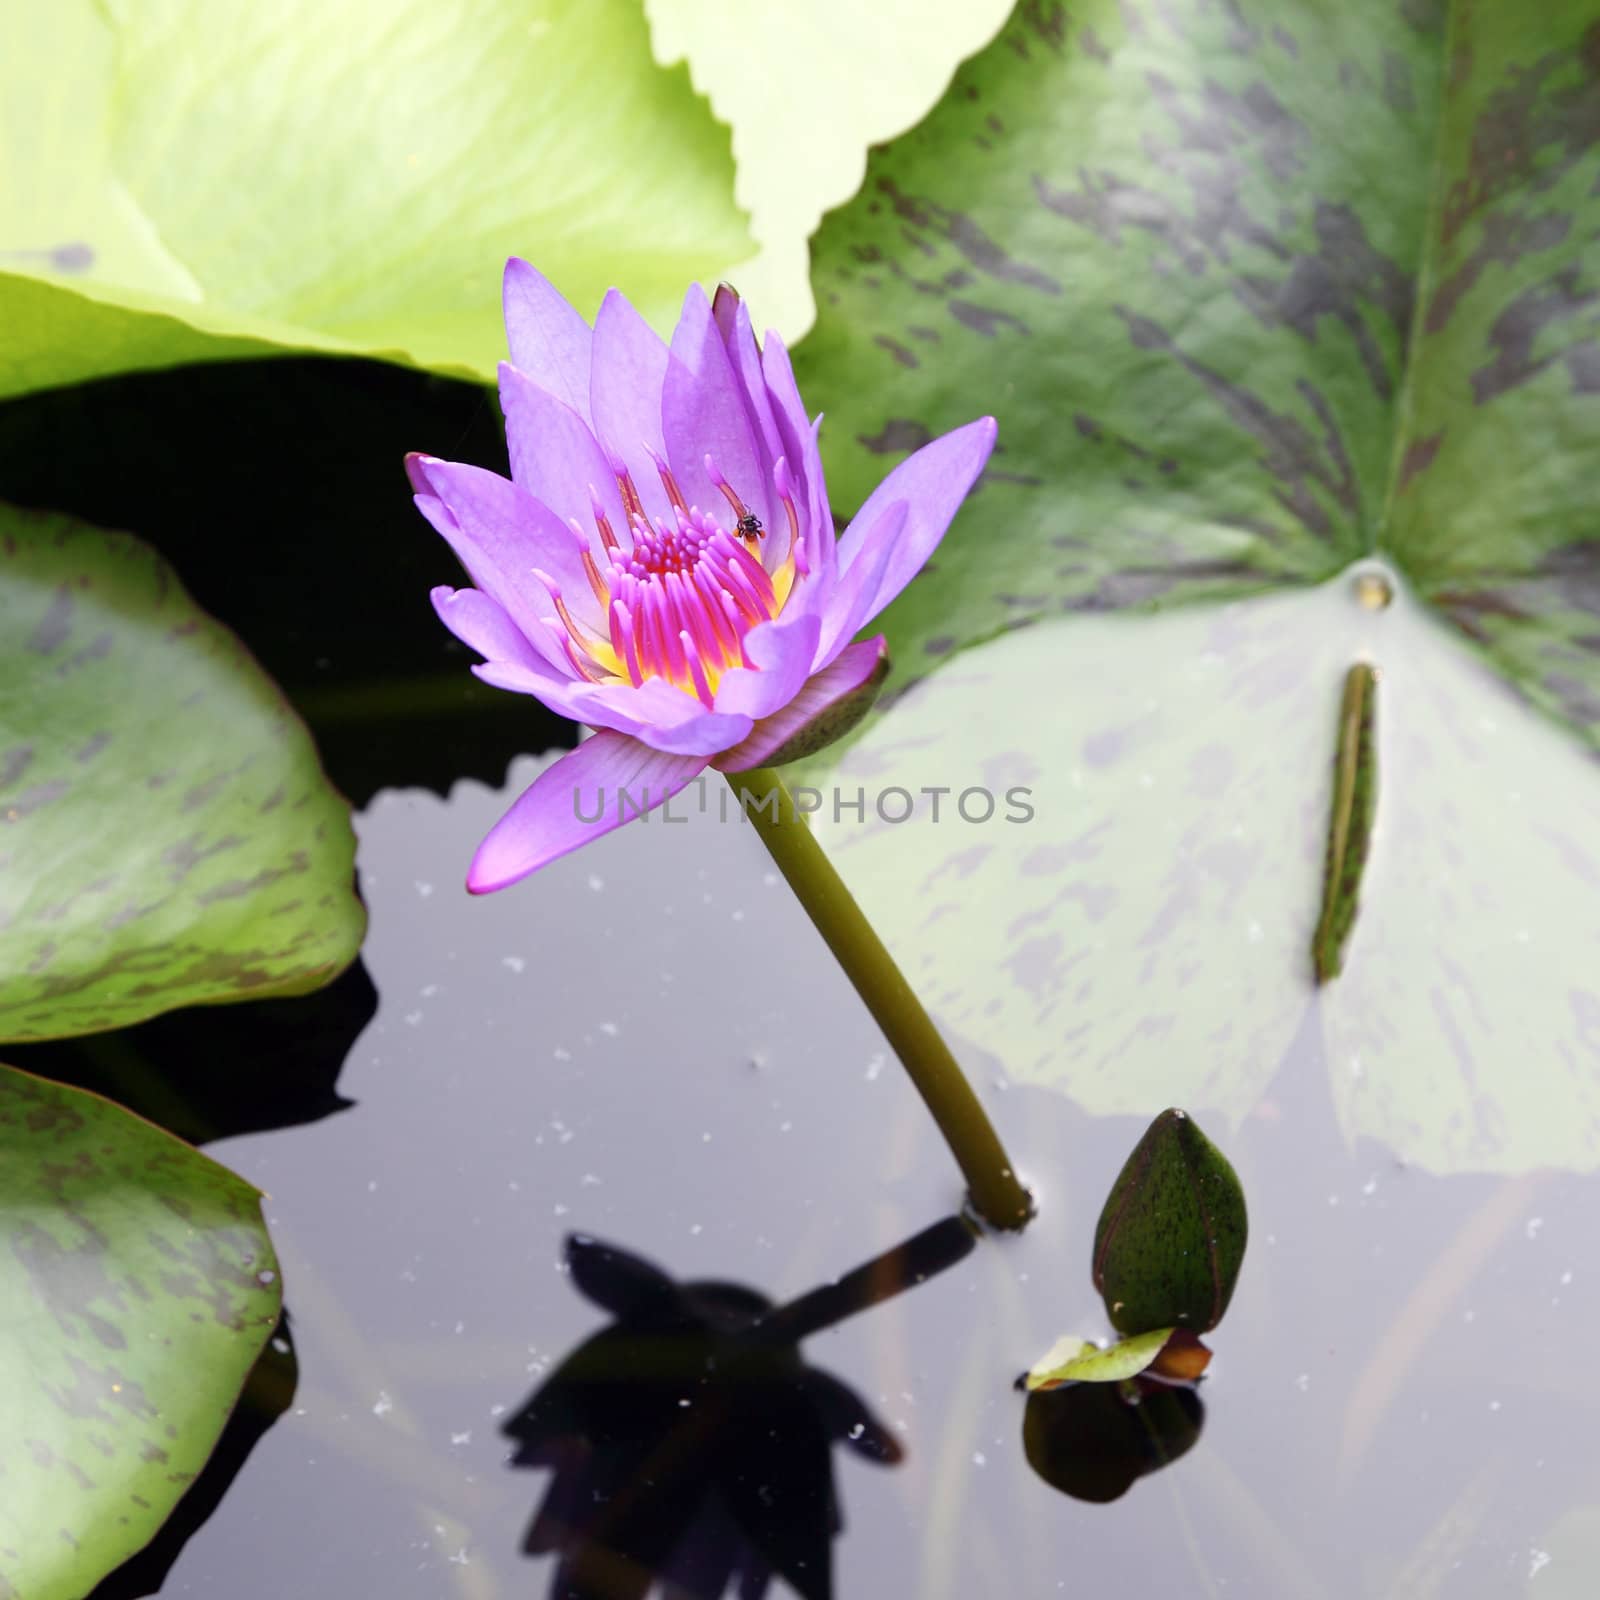 The blooming purple lotus in the natural pond with insect